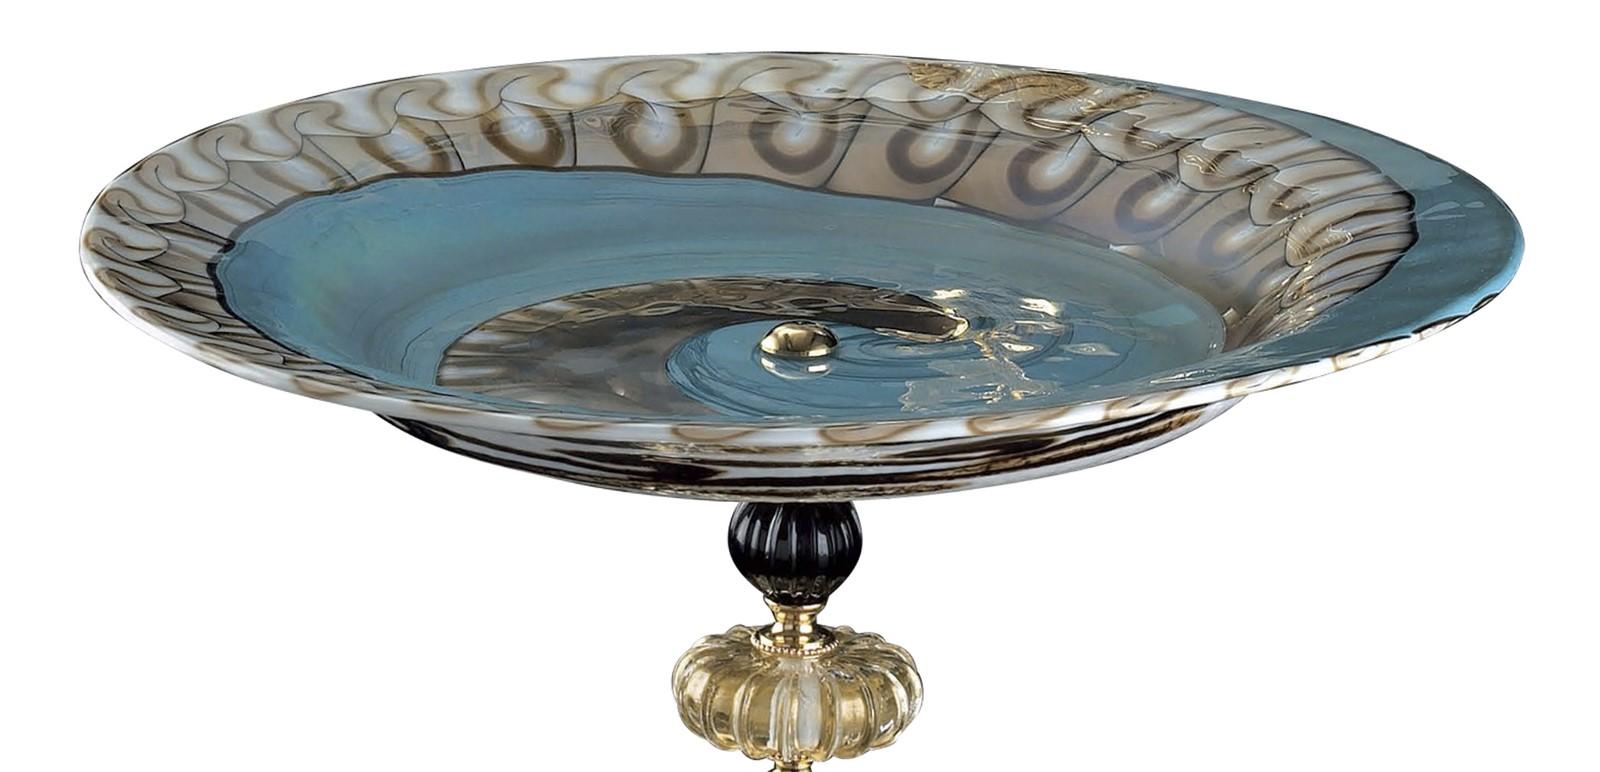 This majestic centerpiece makes a beautiful addition to any table. Its round base is in 24k gold plated brass supports a striking multicolored striking sculptural piece of Murano glass bearing a round shape, ideal for displaying any item of your